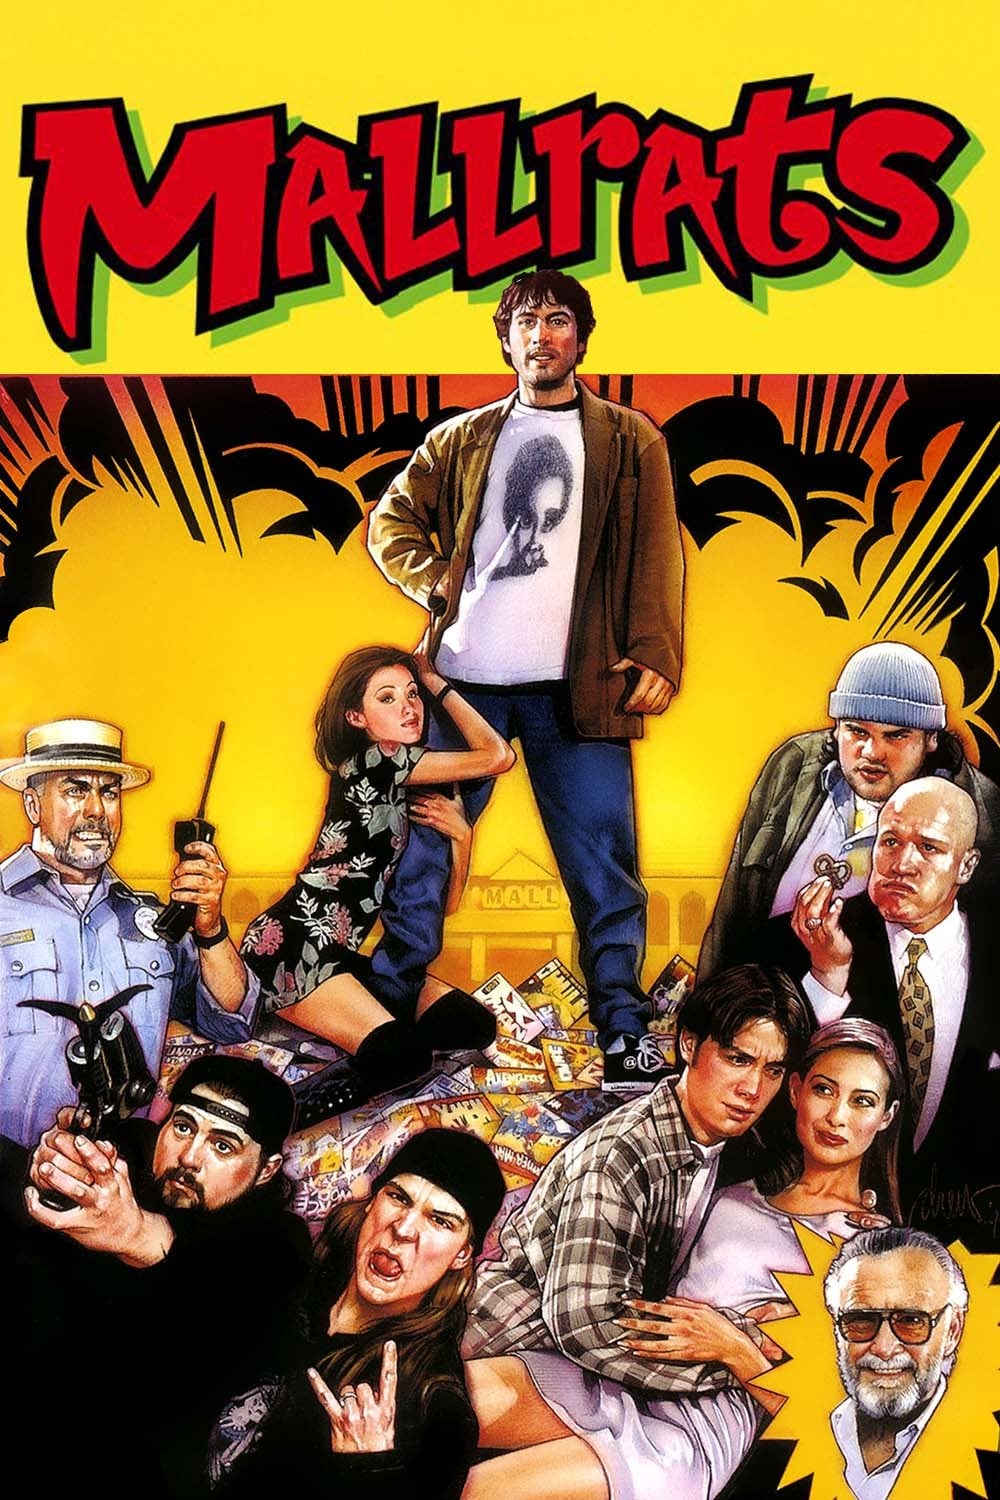 Poster for the movie "Mallrats"